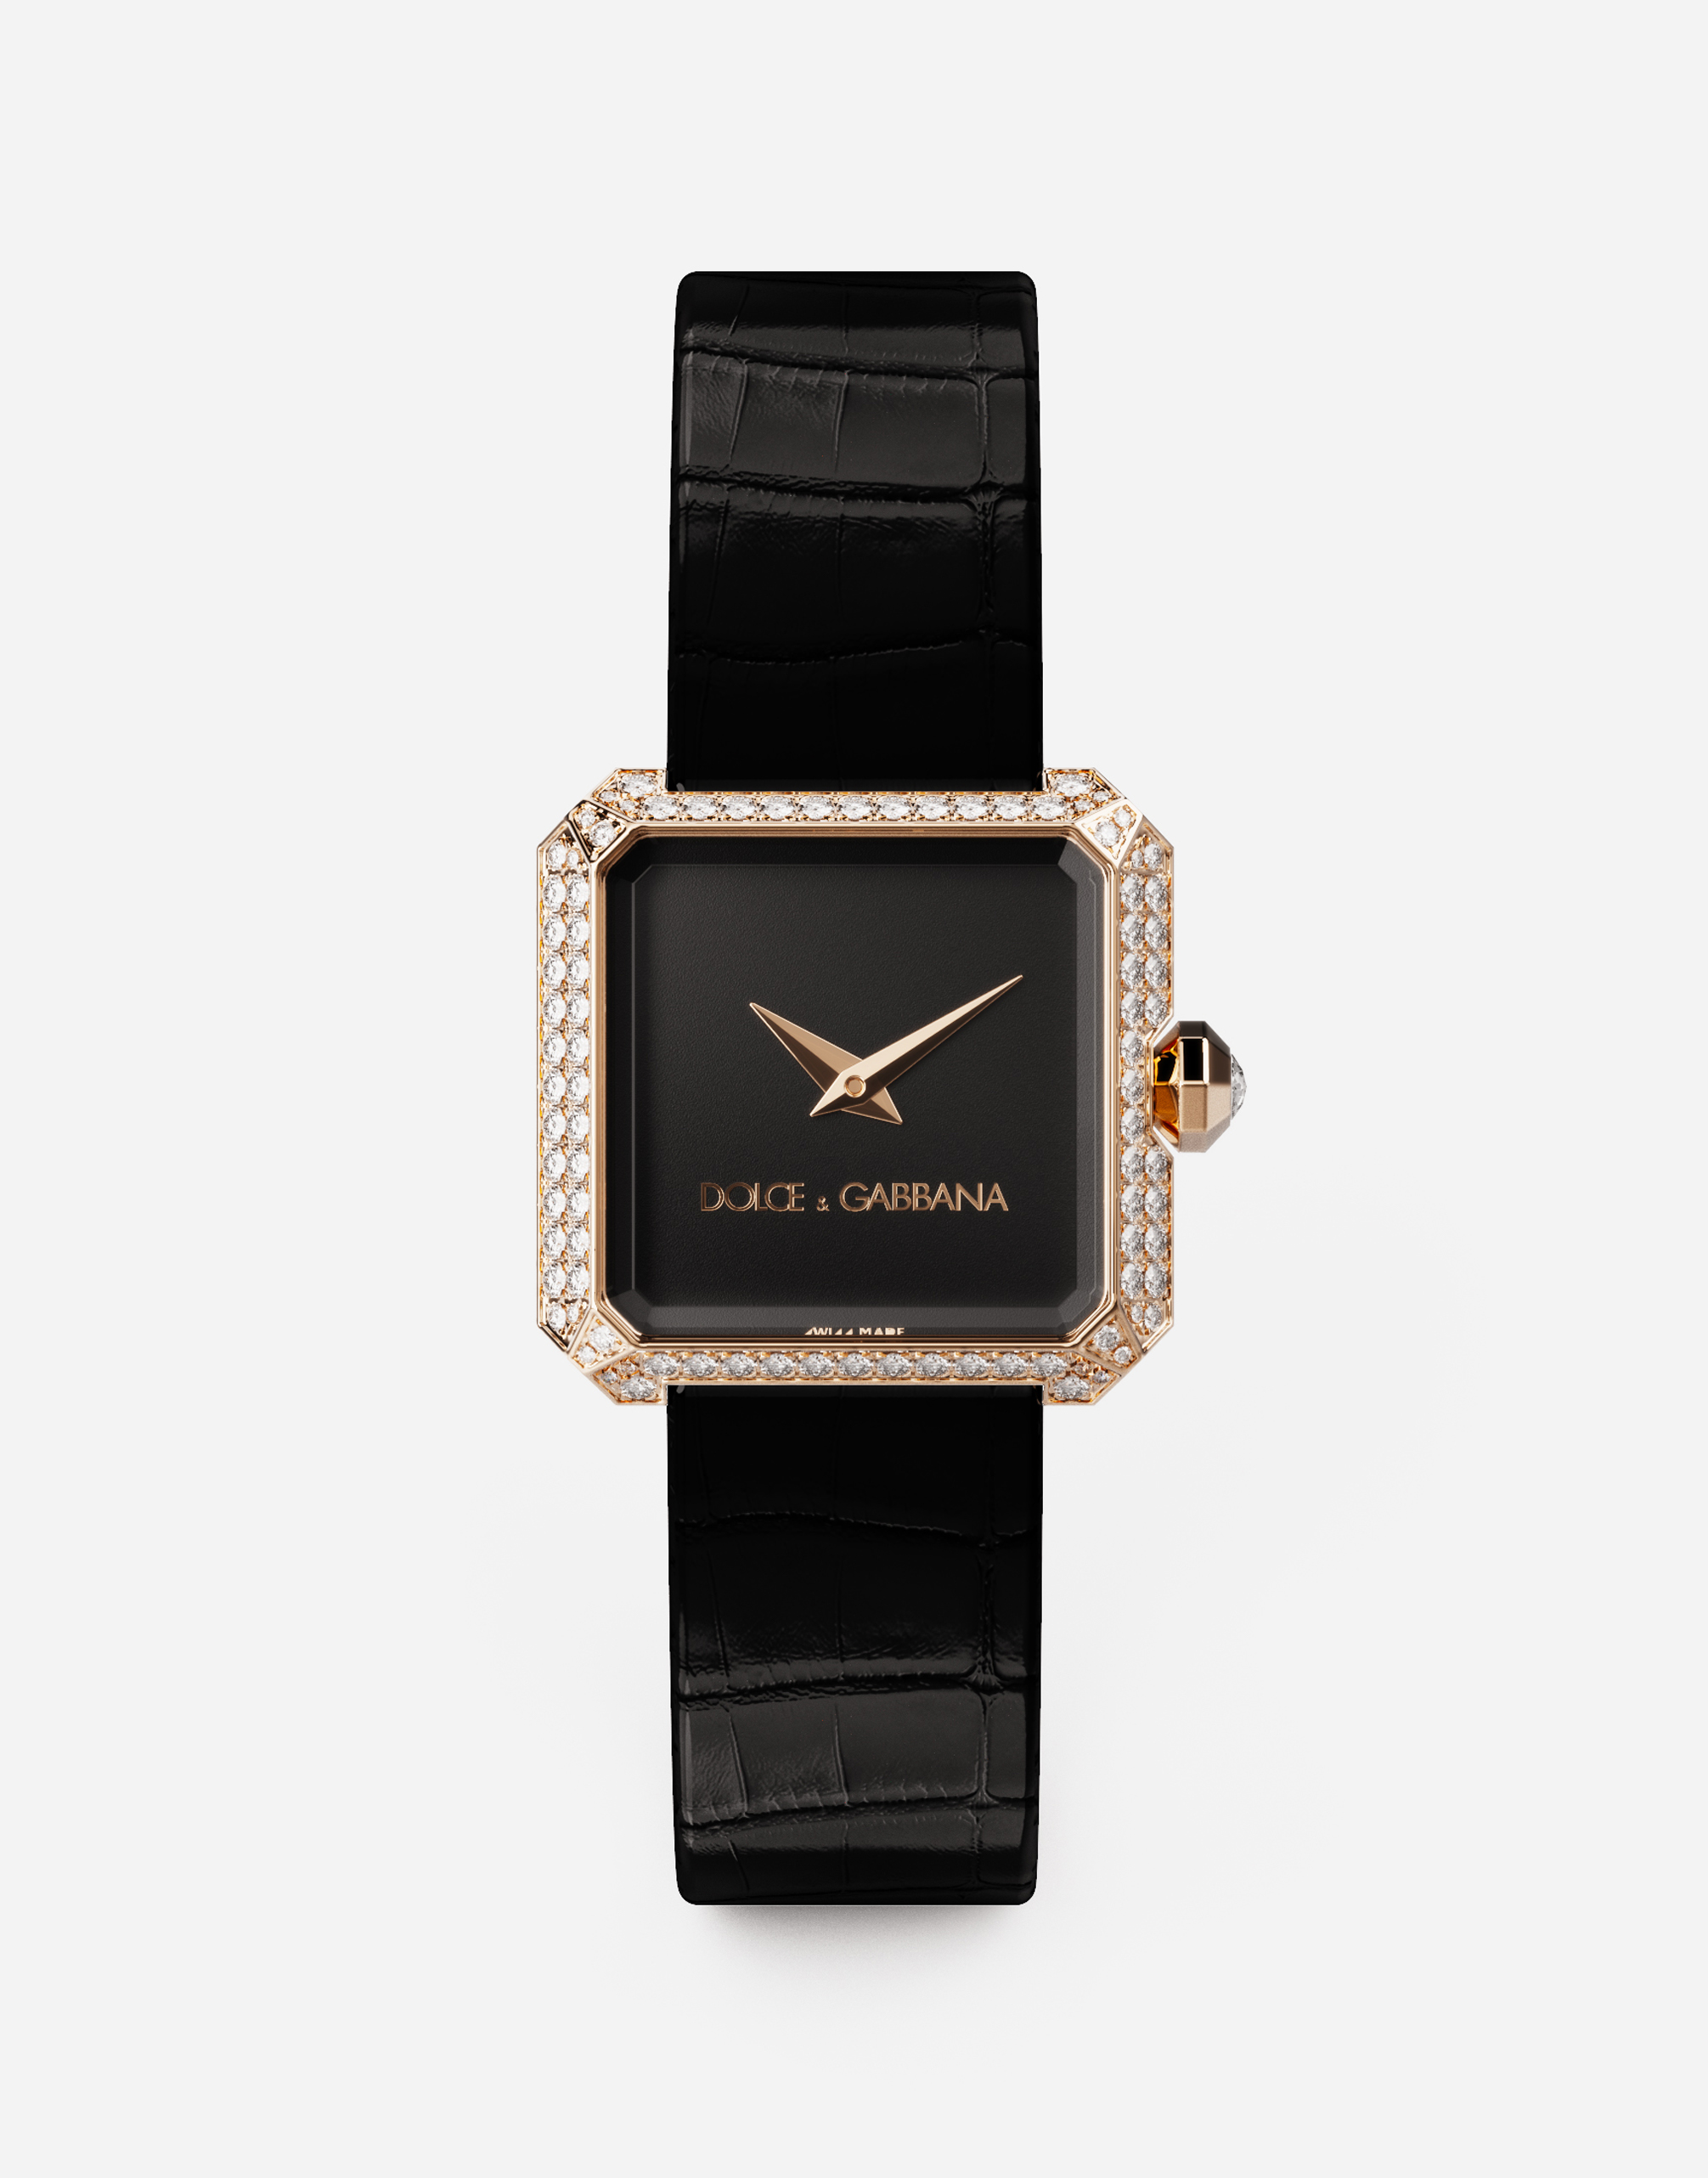 GOLD WATCH WITH DIAMONDS